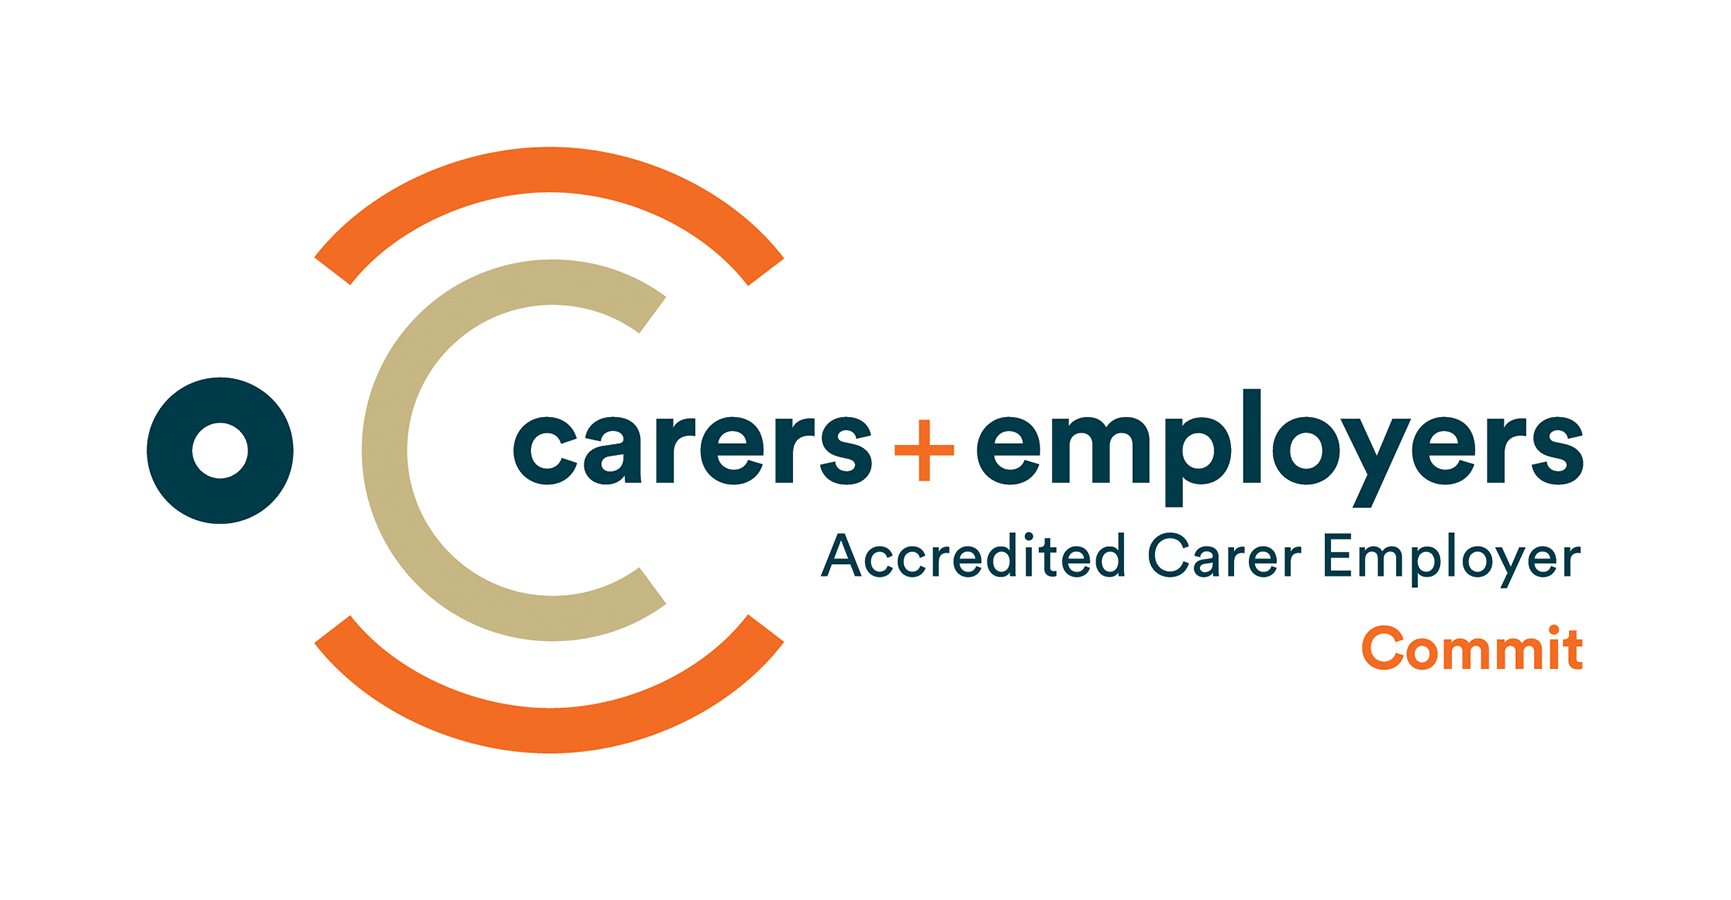 Carers plus employers, Accredited Carer Employer Commit logo.